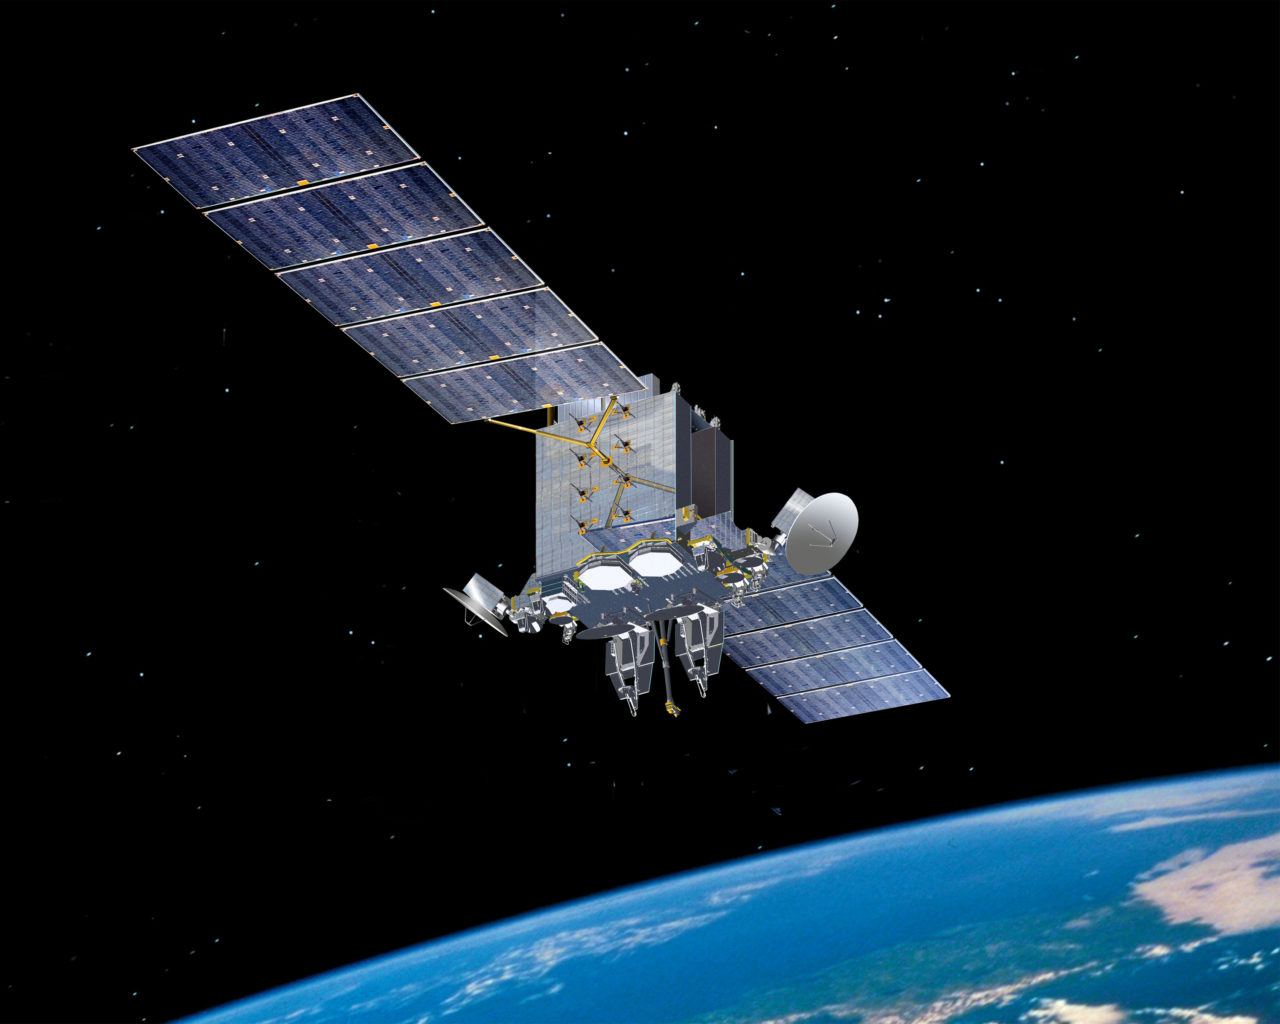 An Advanced Extremely High Frequency (AEHF) satellite. Photo: Lockheed Martin. 